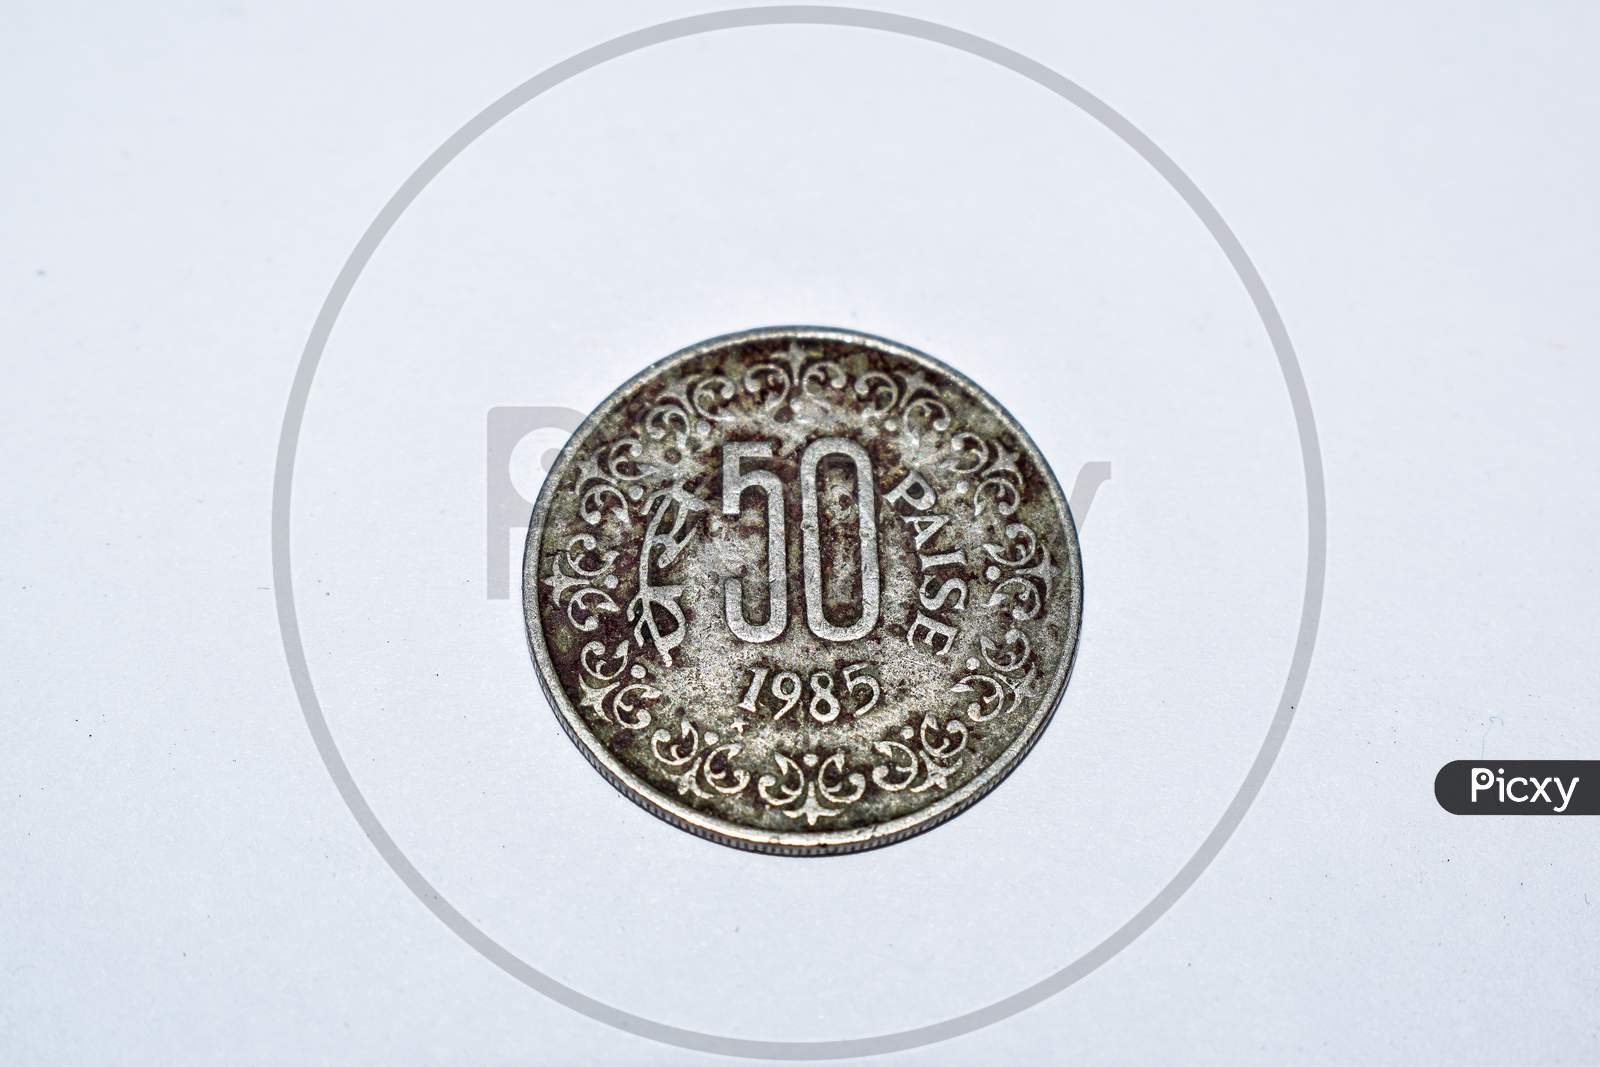 Old Indian 50 Paise Coin. Year 1985 Vintage Coin. White Background.